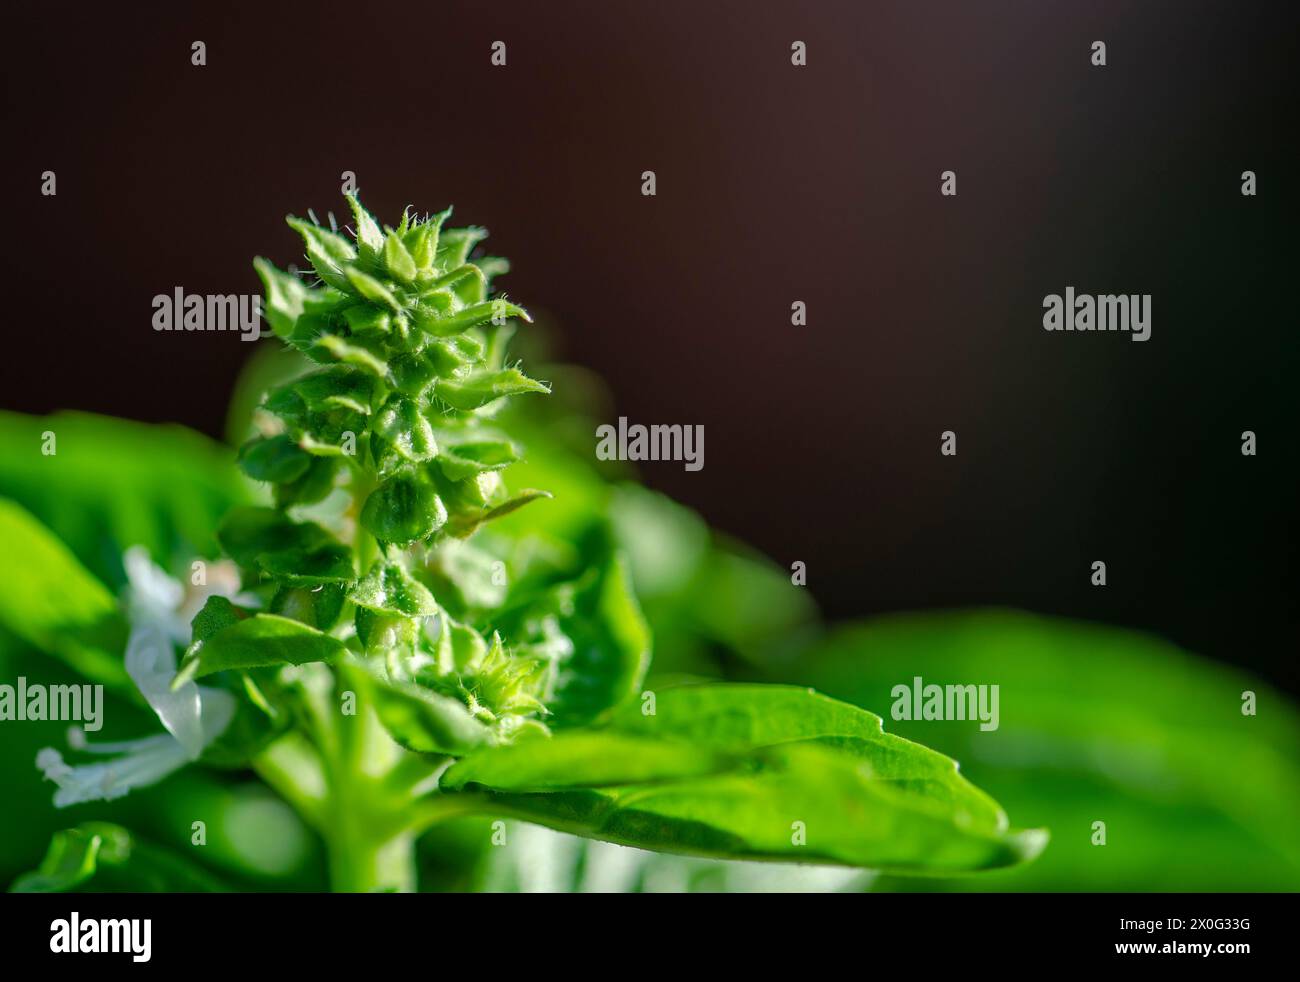 Flower of a Basil herb against dark background Stock Photo